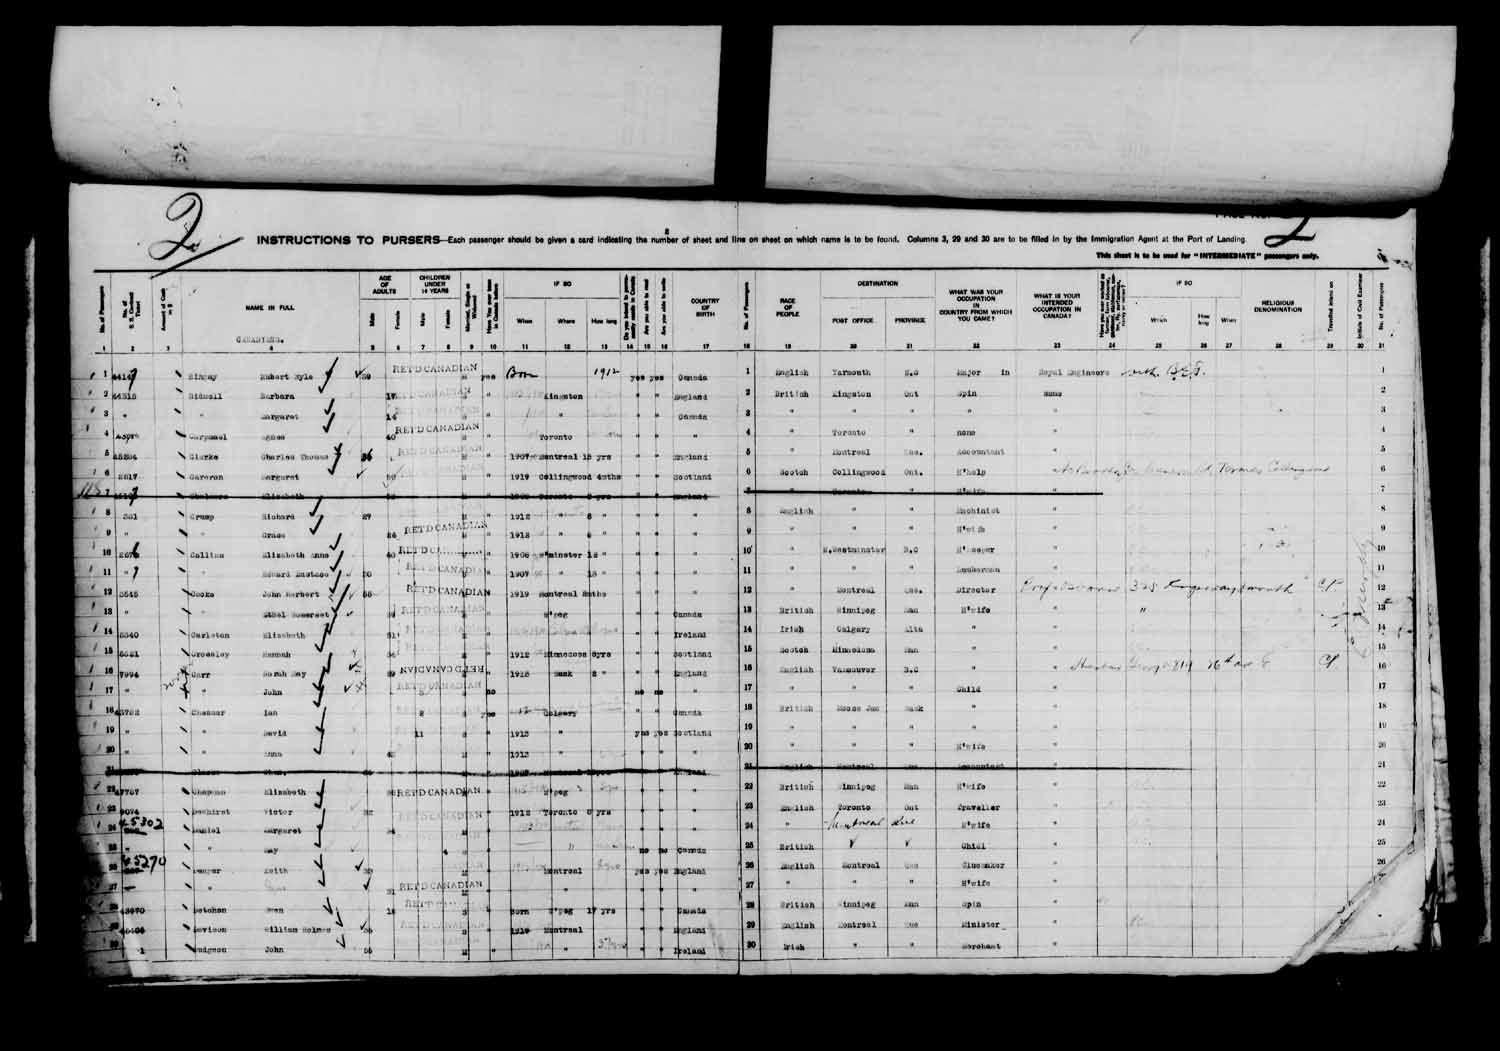 Digitized page of Passenger Lists for Image No.: e003610609